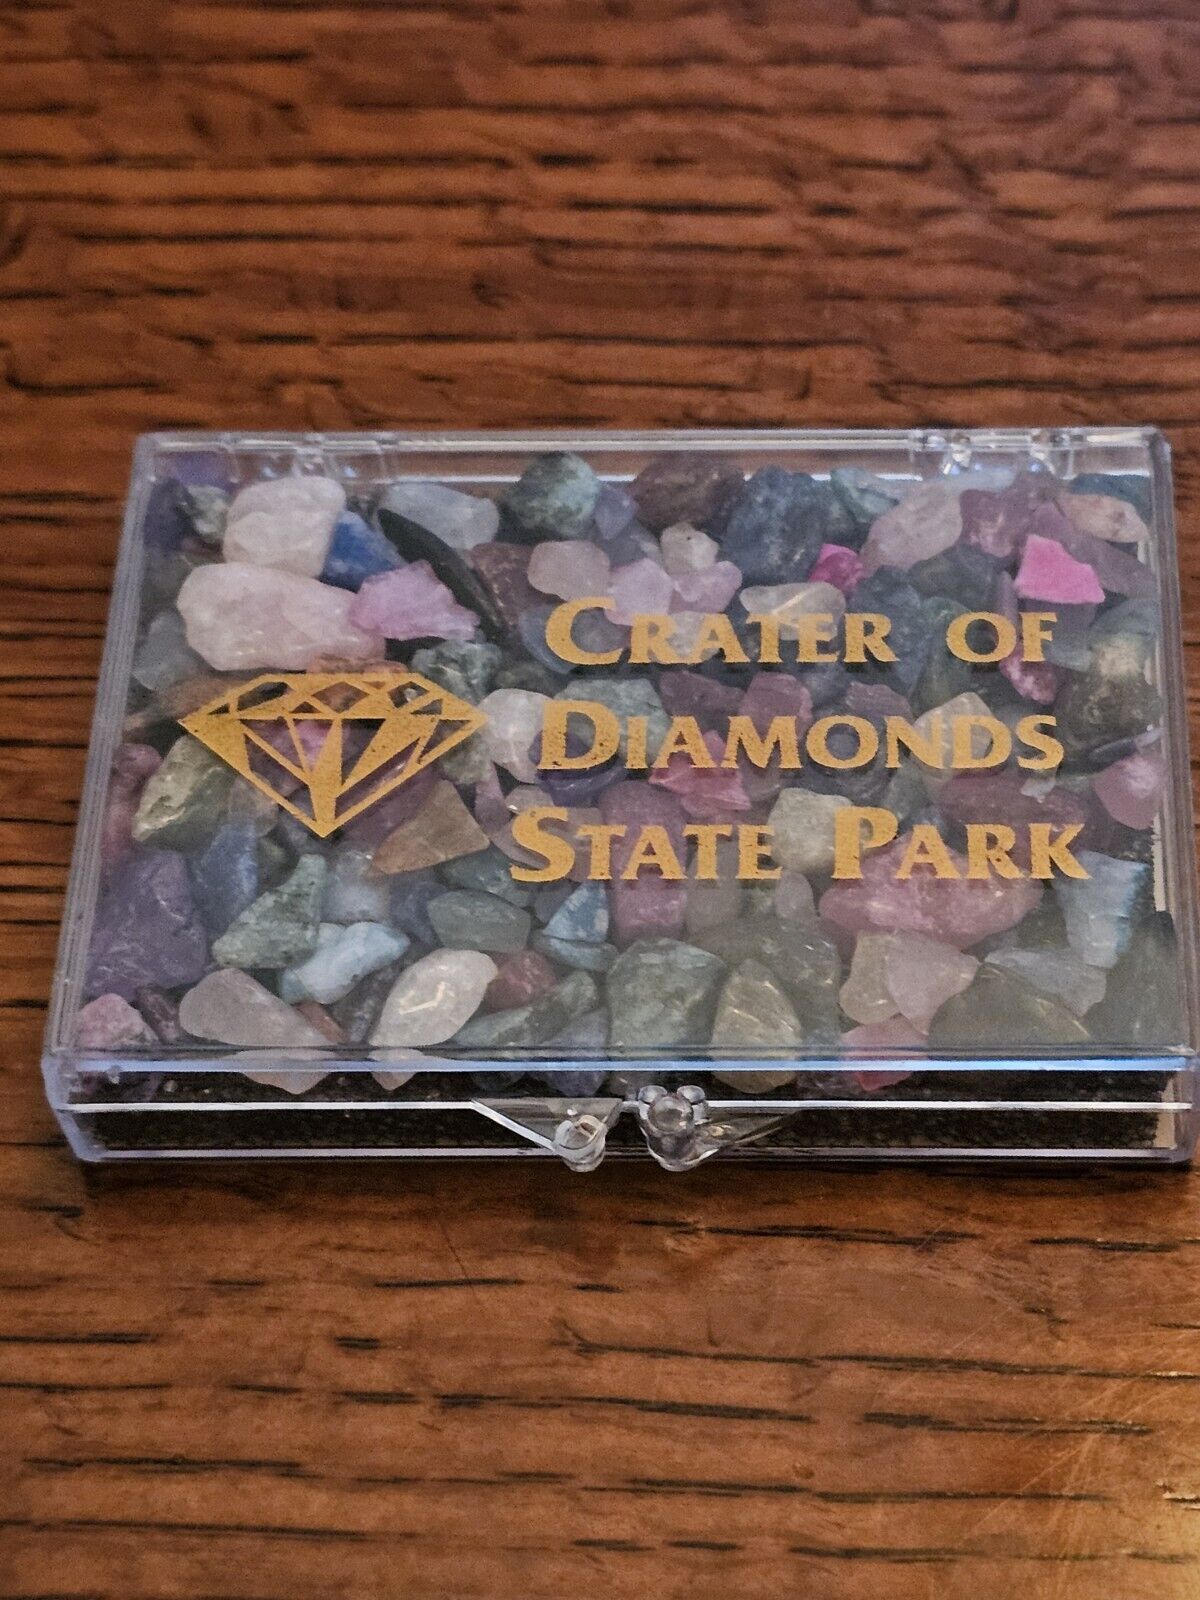 NEW Real Possible Diamond Ore Gems From Crater Of Diamonds. Mixed Unsearched